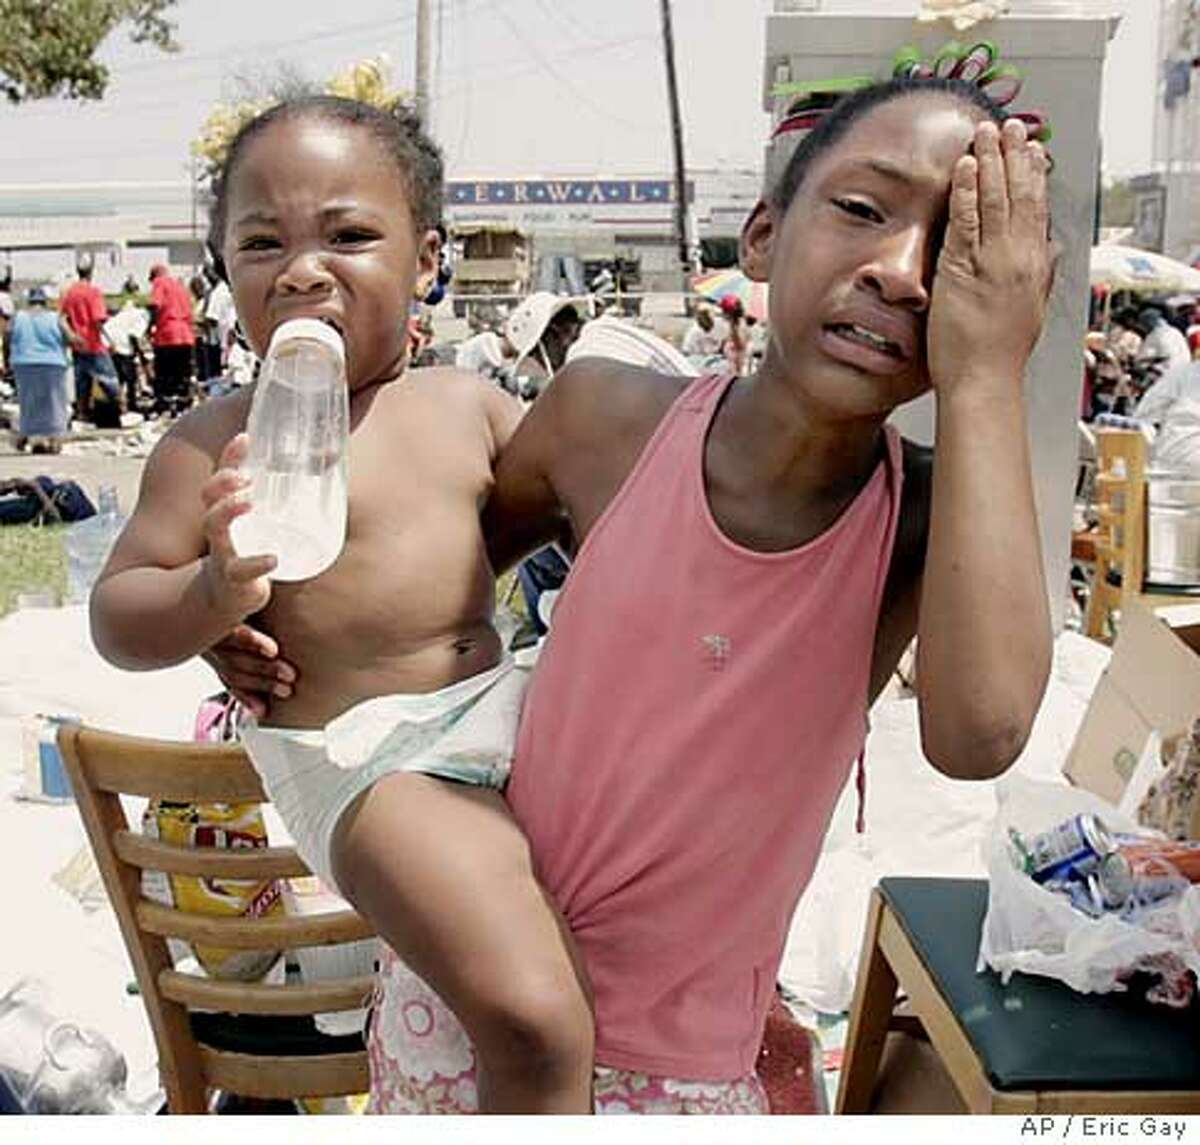 Terri Dorsey, 10, and Imari Clark, 1, reacts after as a family member is treated for heat exhaustion where they have been waiting for days to be evacuated from the convention center in New Orleans, La., Friday, Sept. 2, 2005. (AP Photo/Eric Gay)